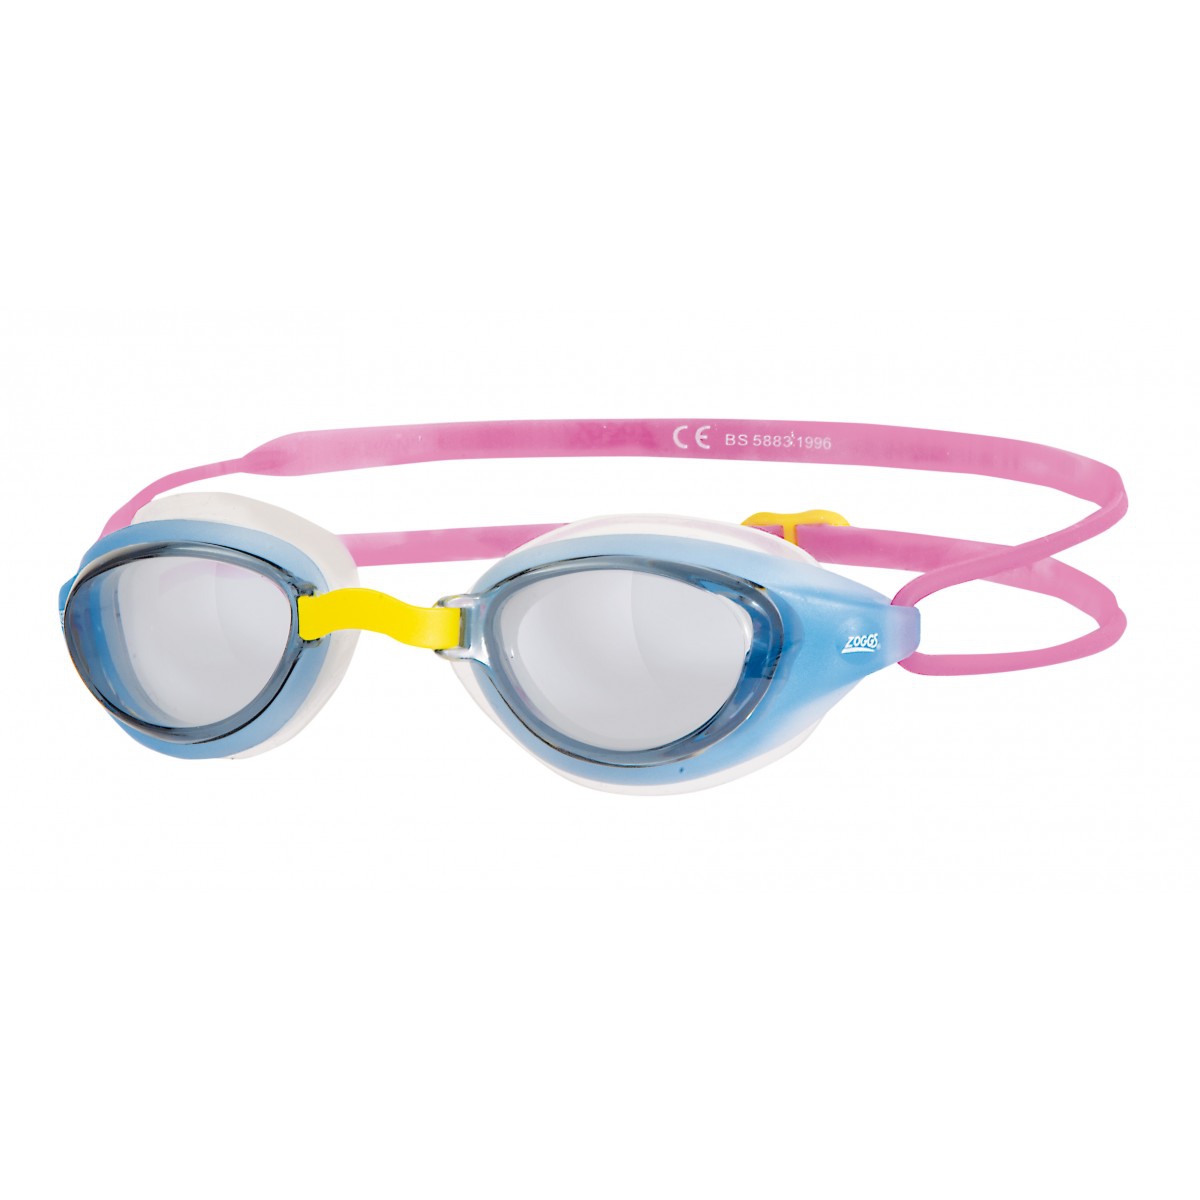 Sonic Air Junior 'Blue & Pink' Swimming Goggles 6-14 Years Pool